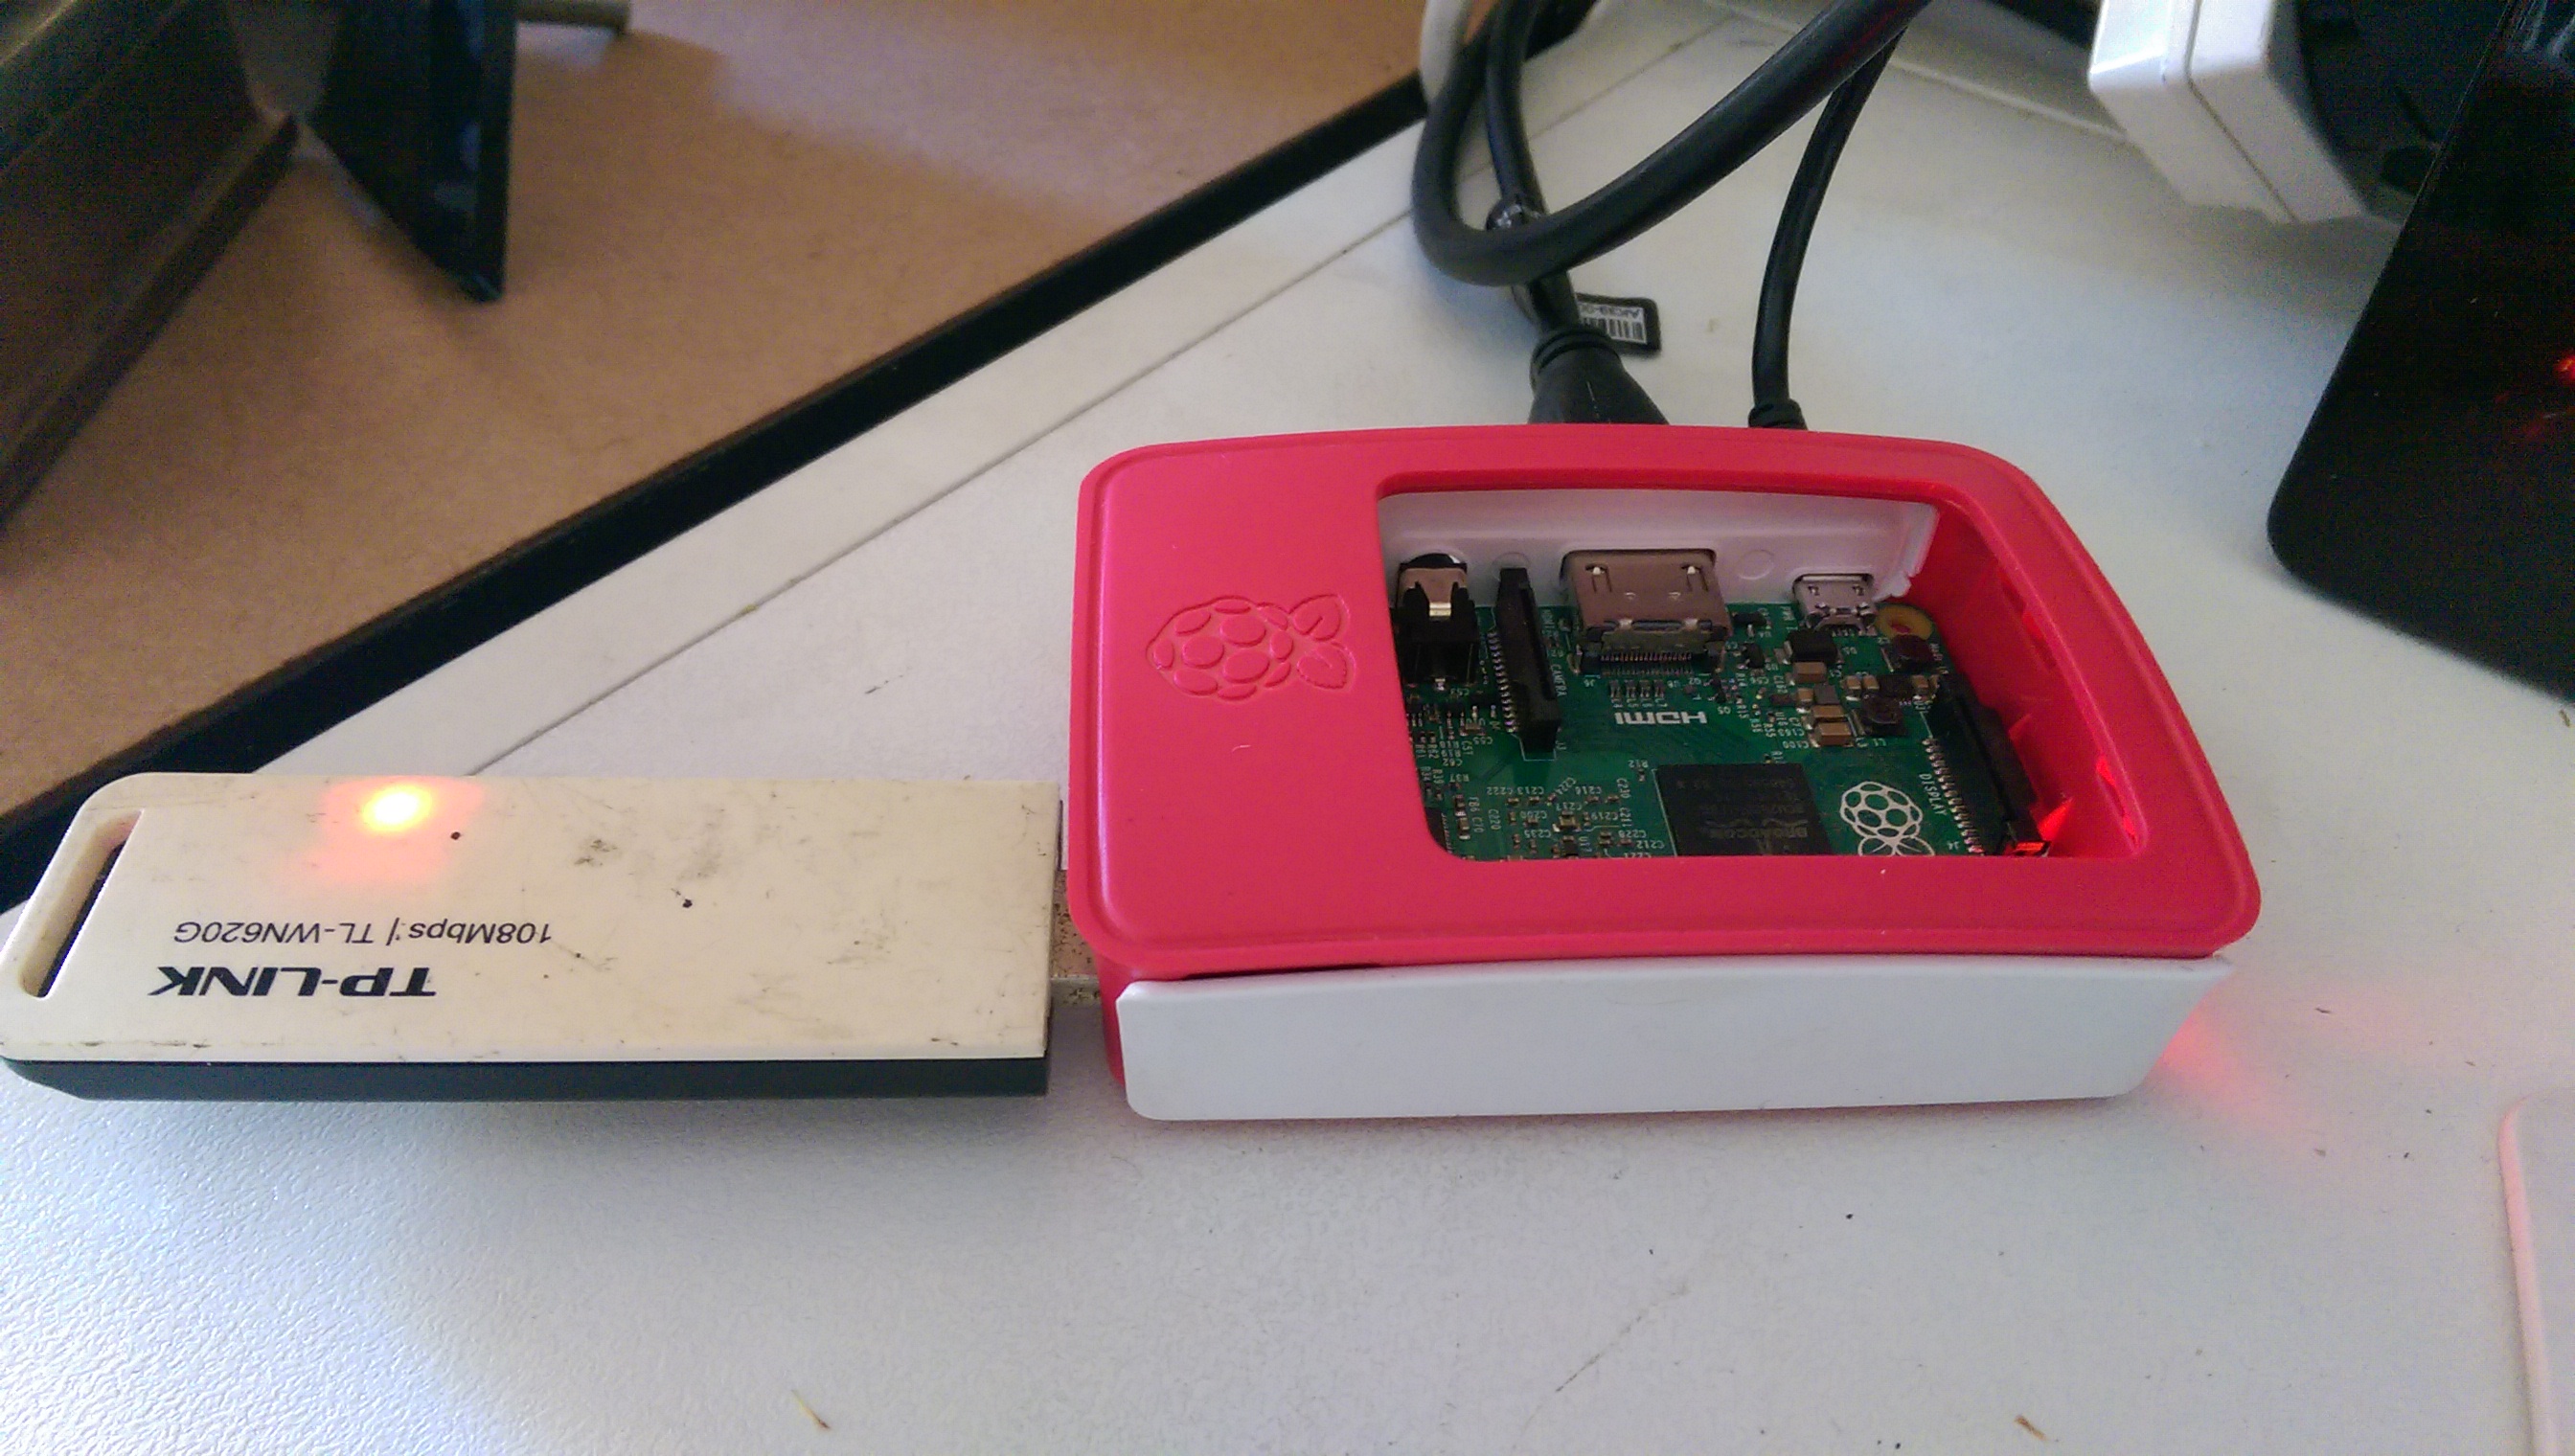 Raspberry Pi Model B, in the offical case and an USB Wireless LAN stick